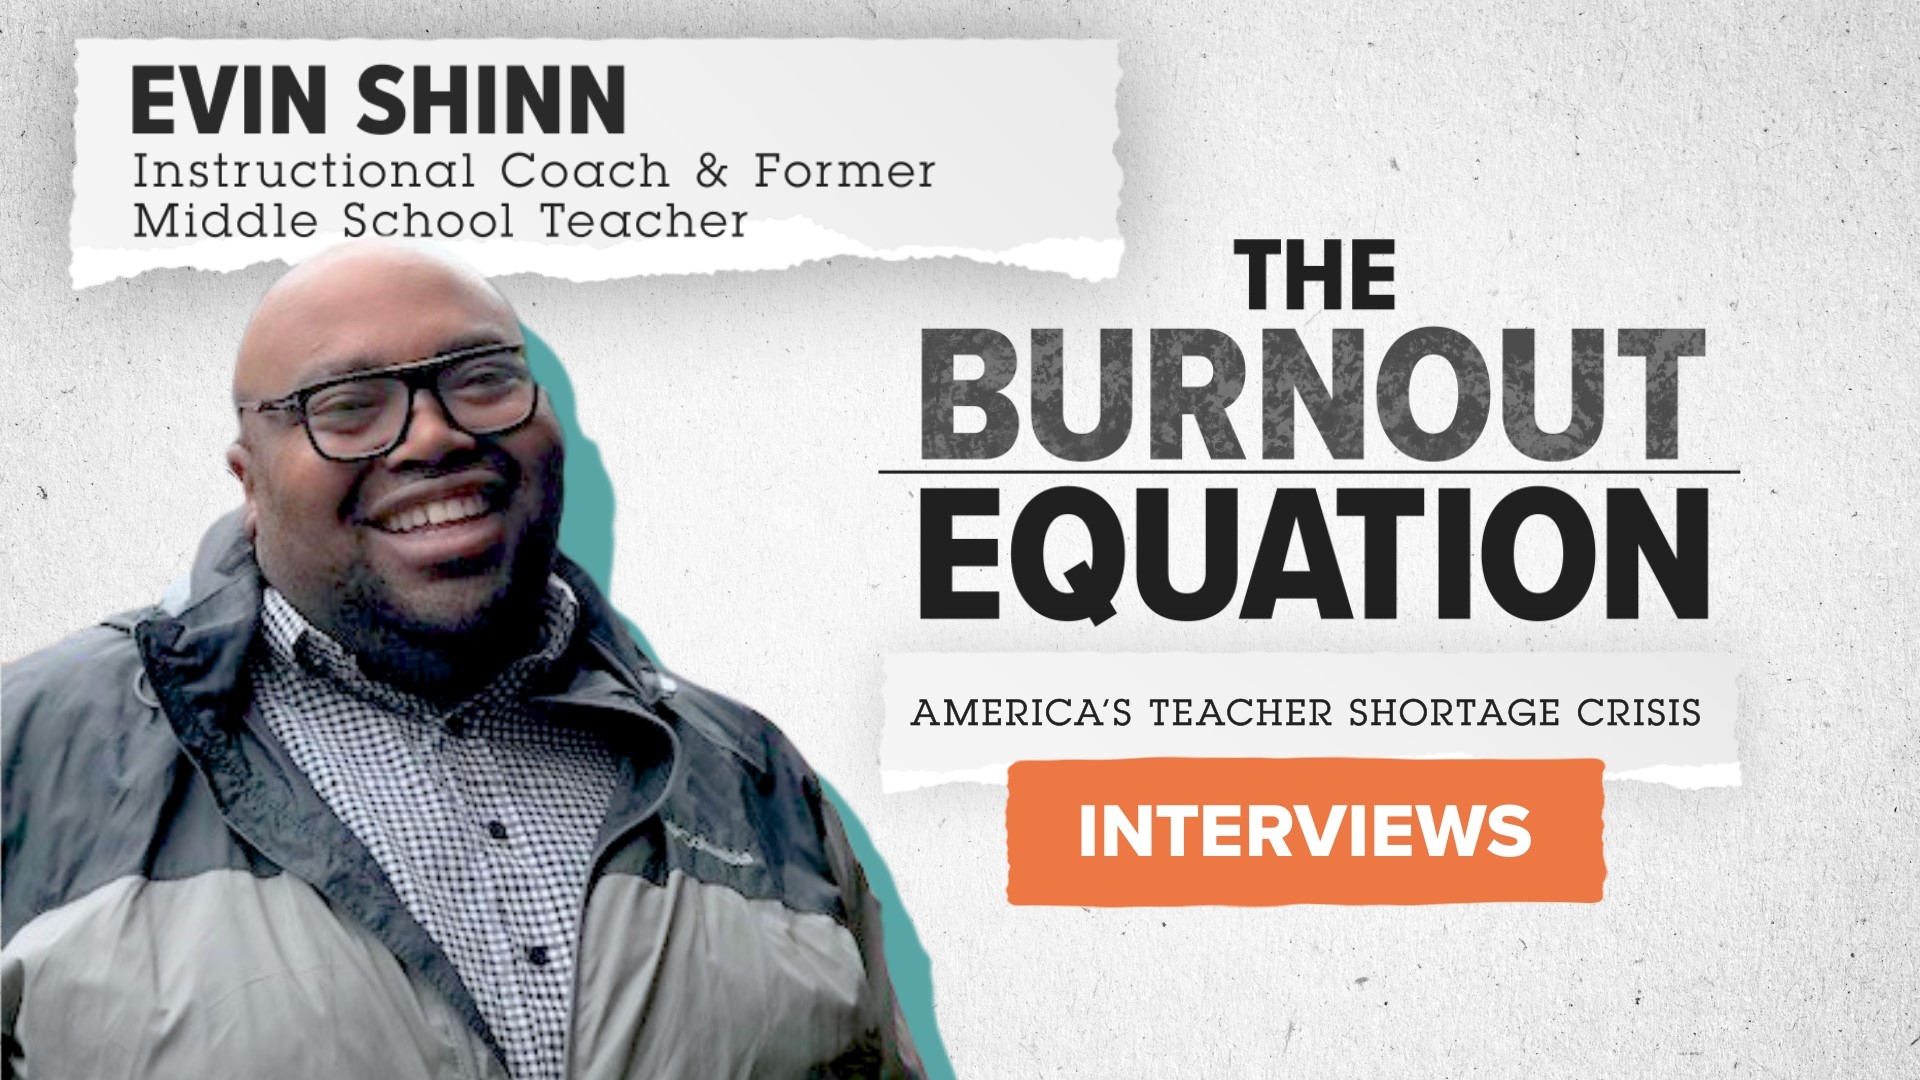 Evin Shinn, a former teacher and current instructional coach, talks about his experience with burning out in the teaching industry.